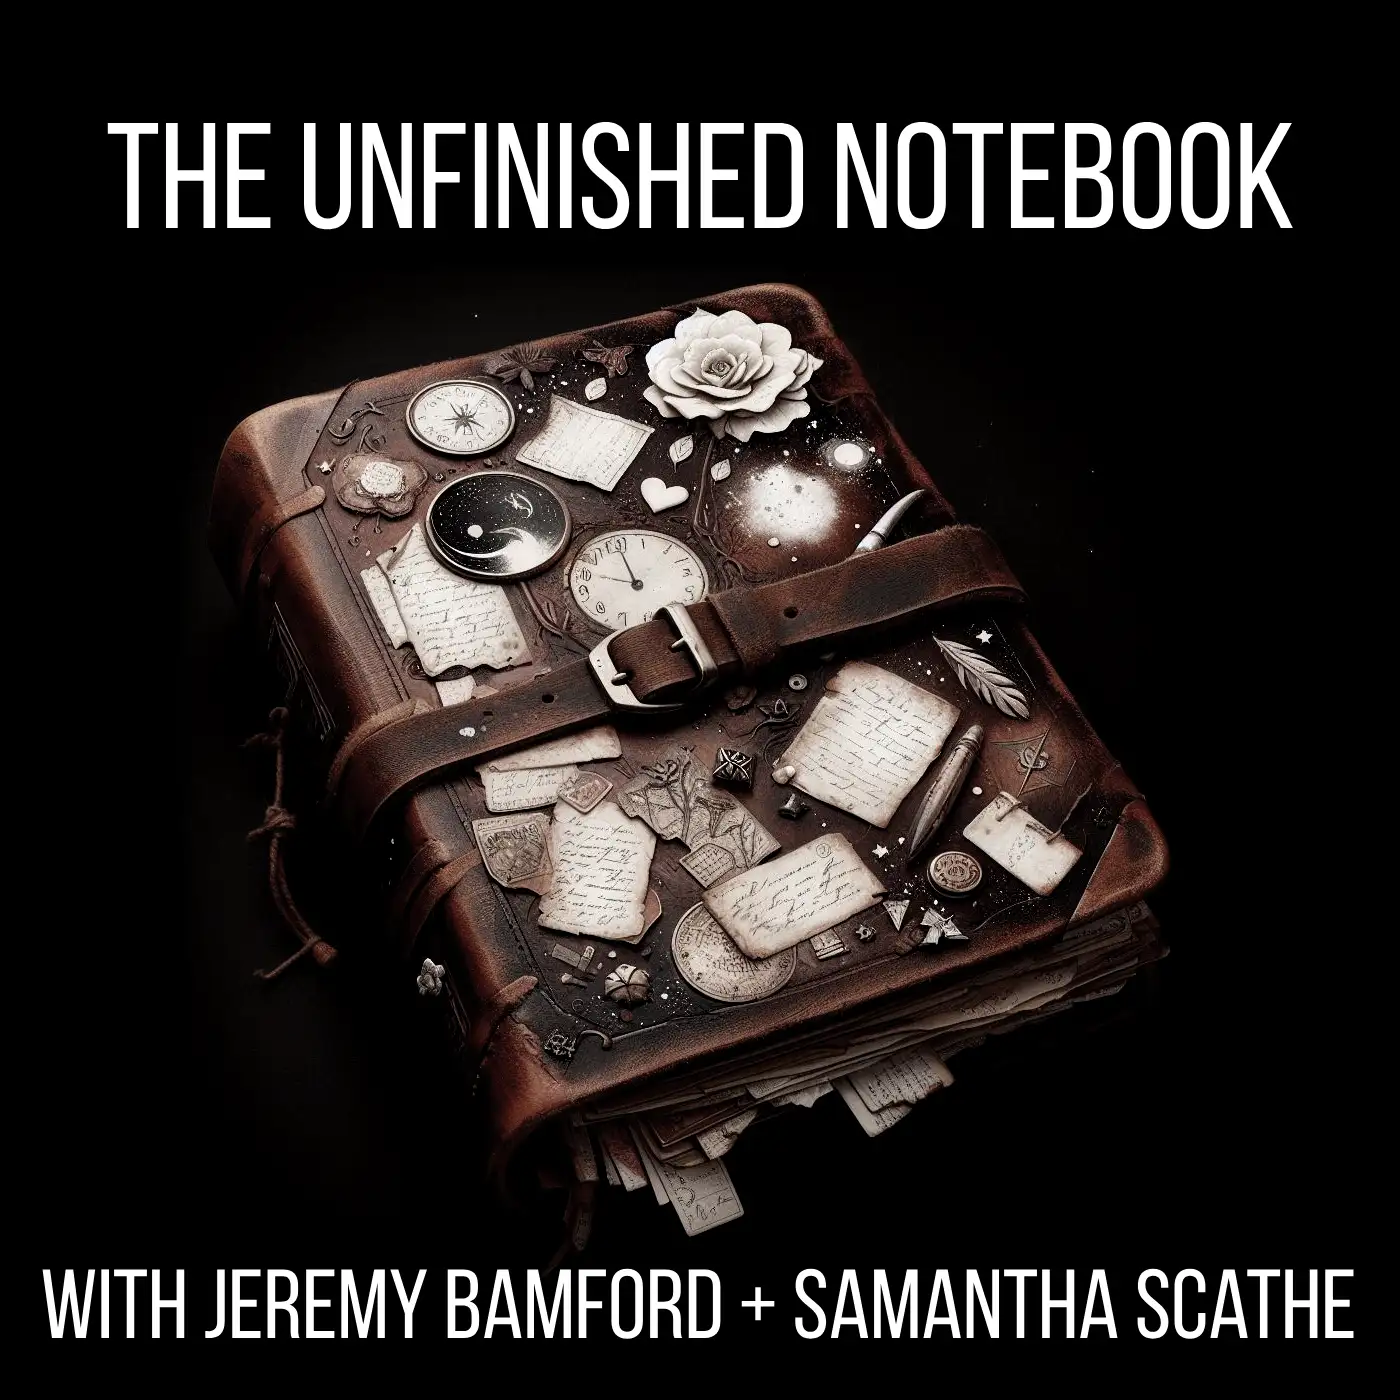 A well-worn journal; The Unfinished Notebook with Jeremy Bamford and Samantha Scathe